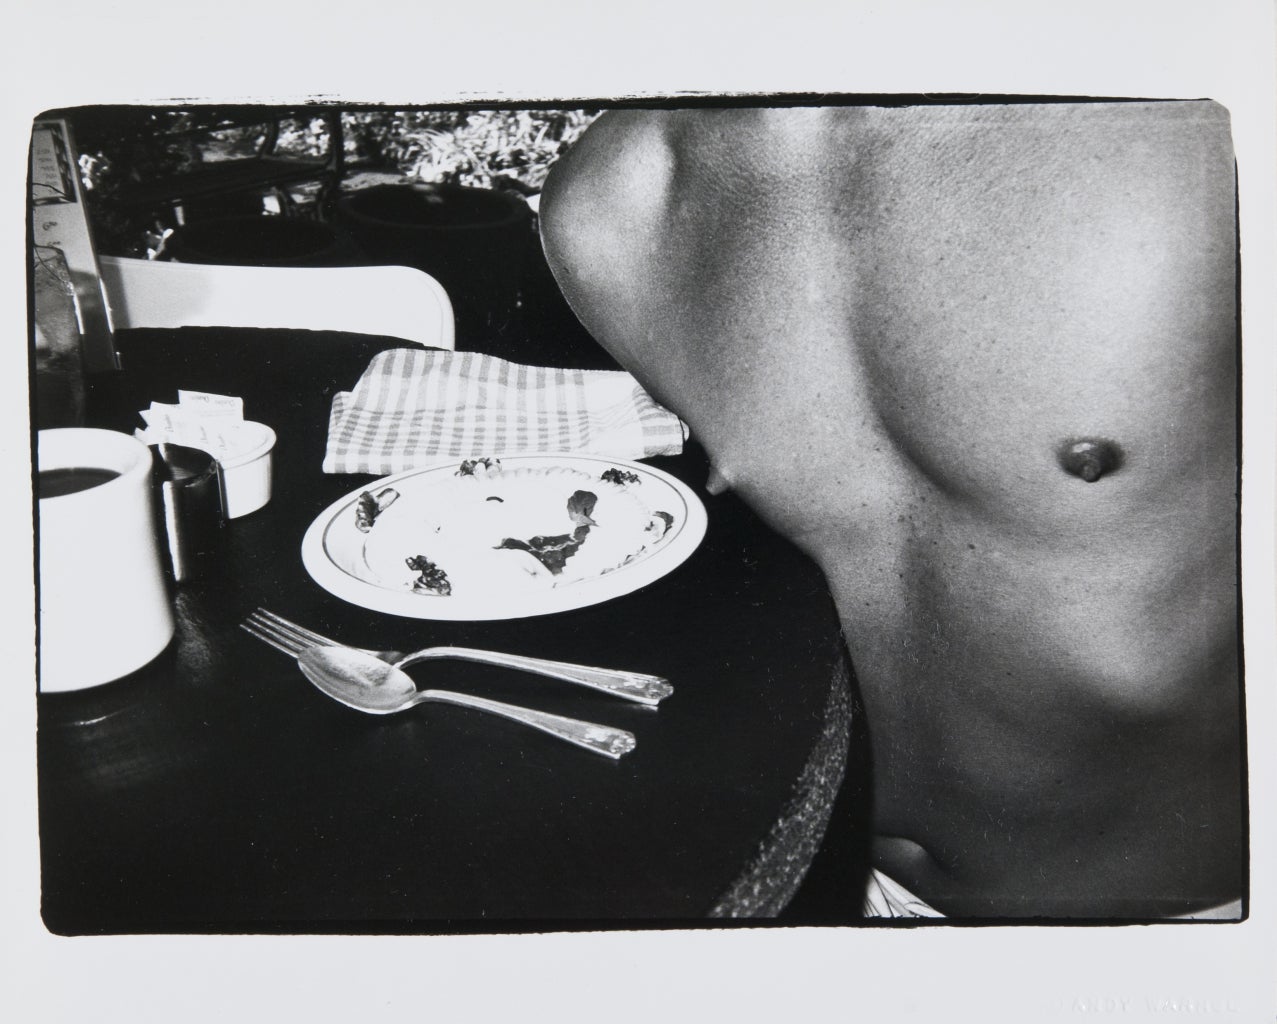 Andy Warhol Still-Life Photograph - Bare Chest with Room Service Tray